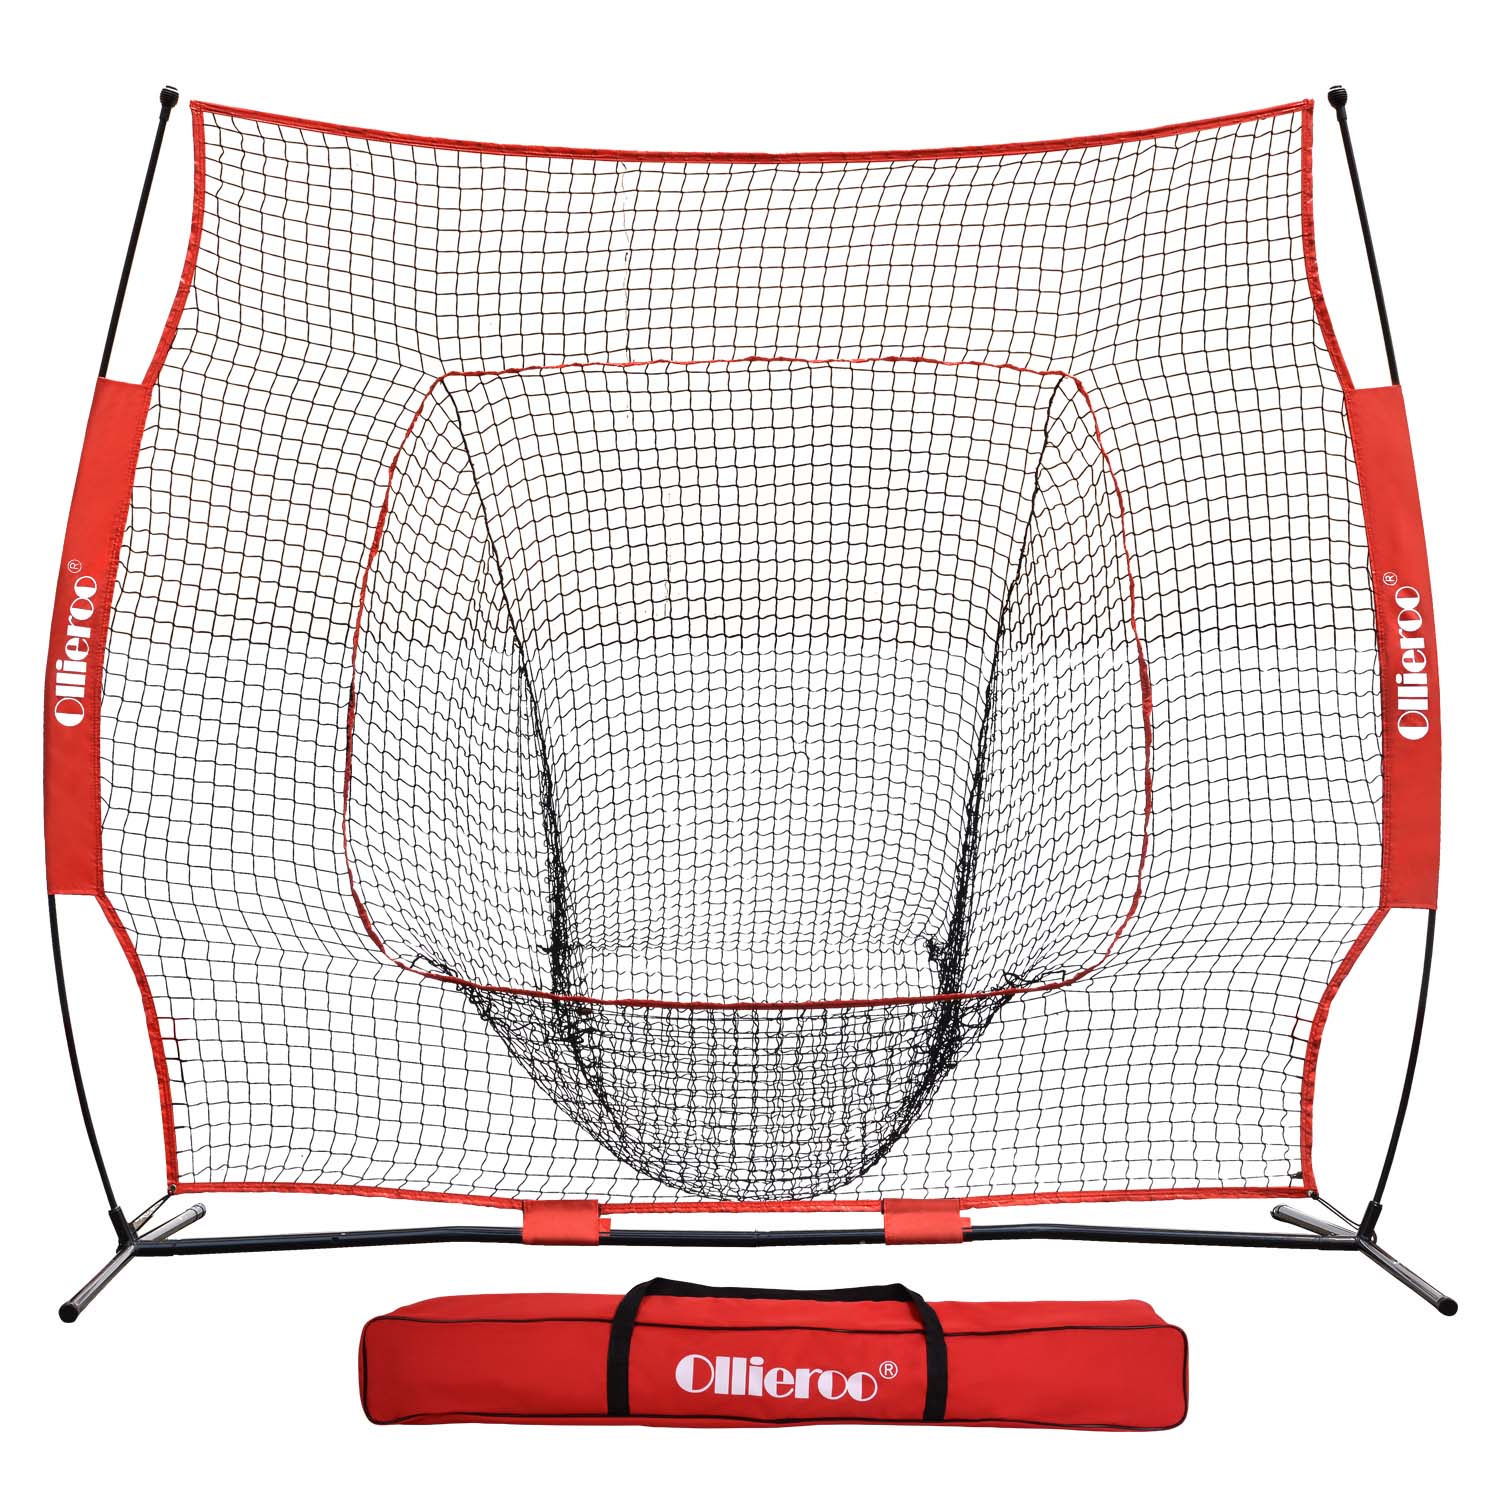 Ollieroo 7'x7' Baseball & Softball Practice Net for Hitting, Pitching - Includes Carry Bag - image 1 of 11